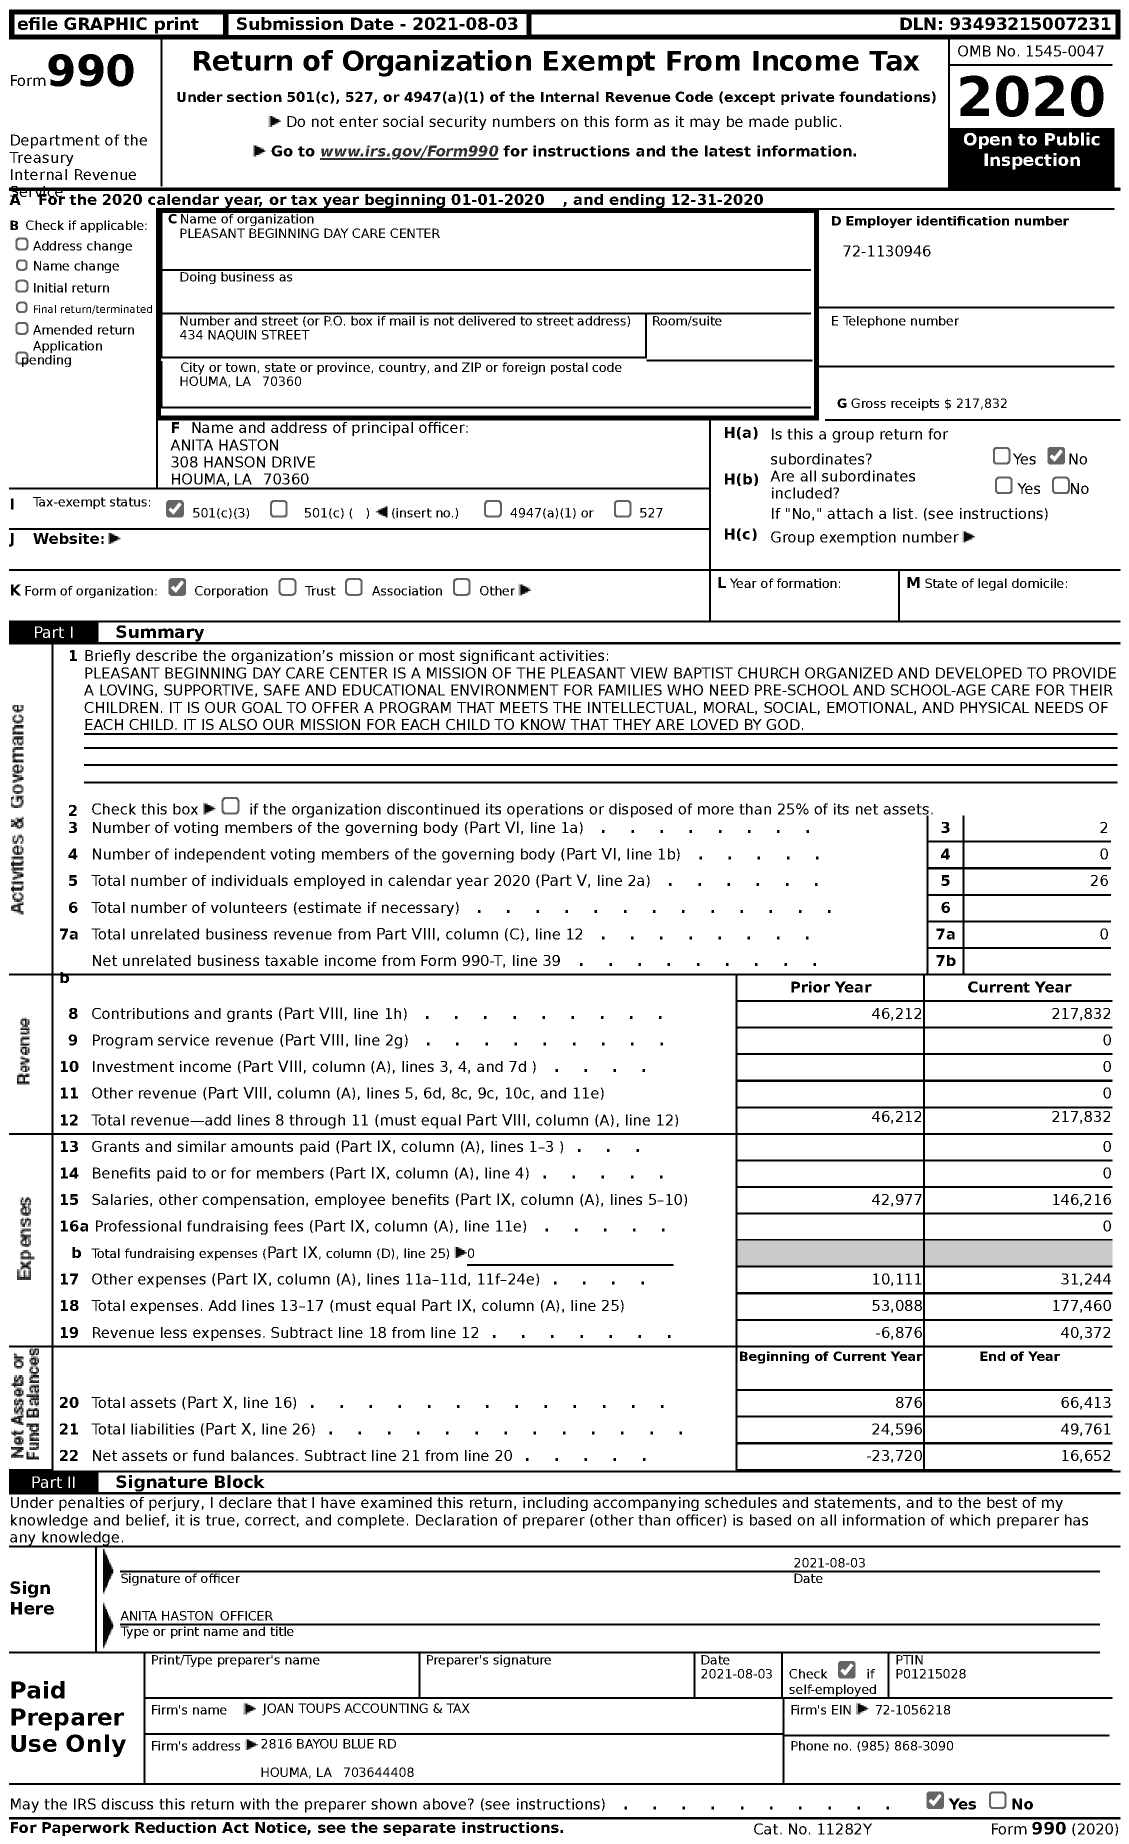 Image of first page of 2020 Form 990 for Pleasant Beginning Day Care Center